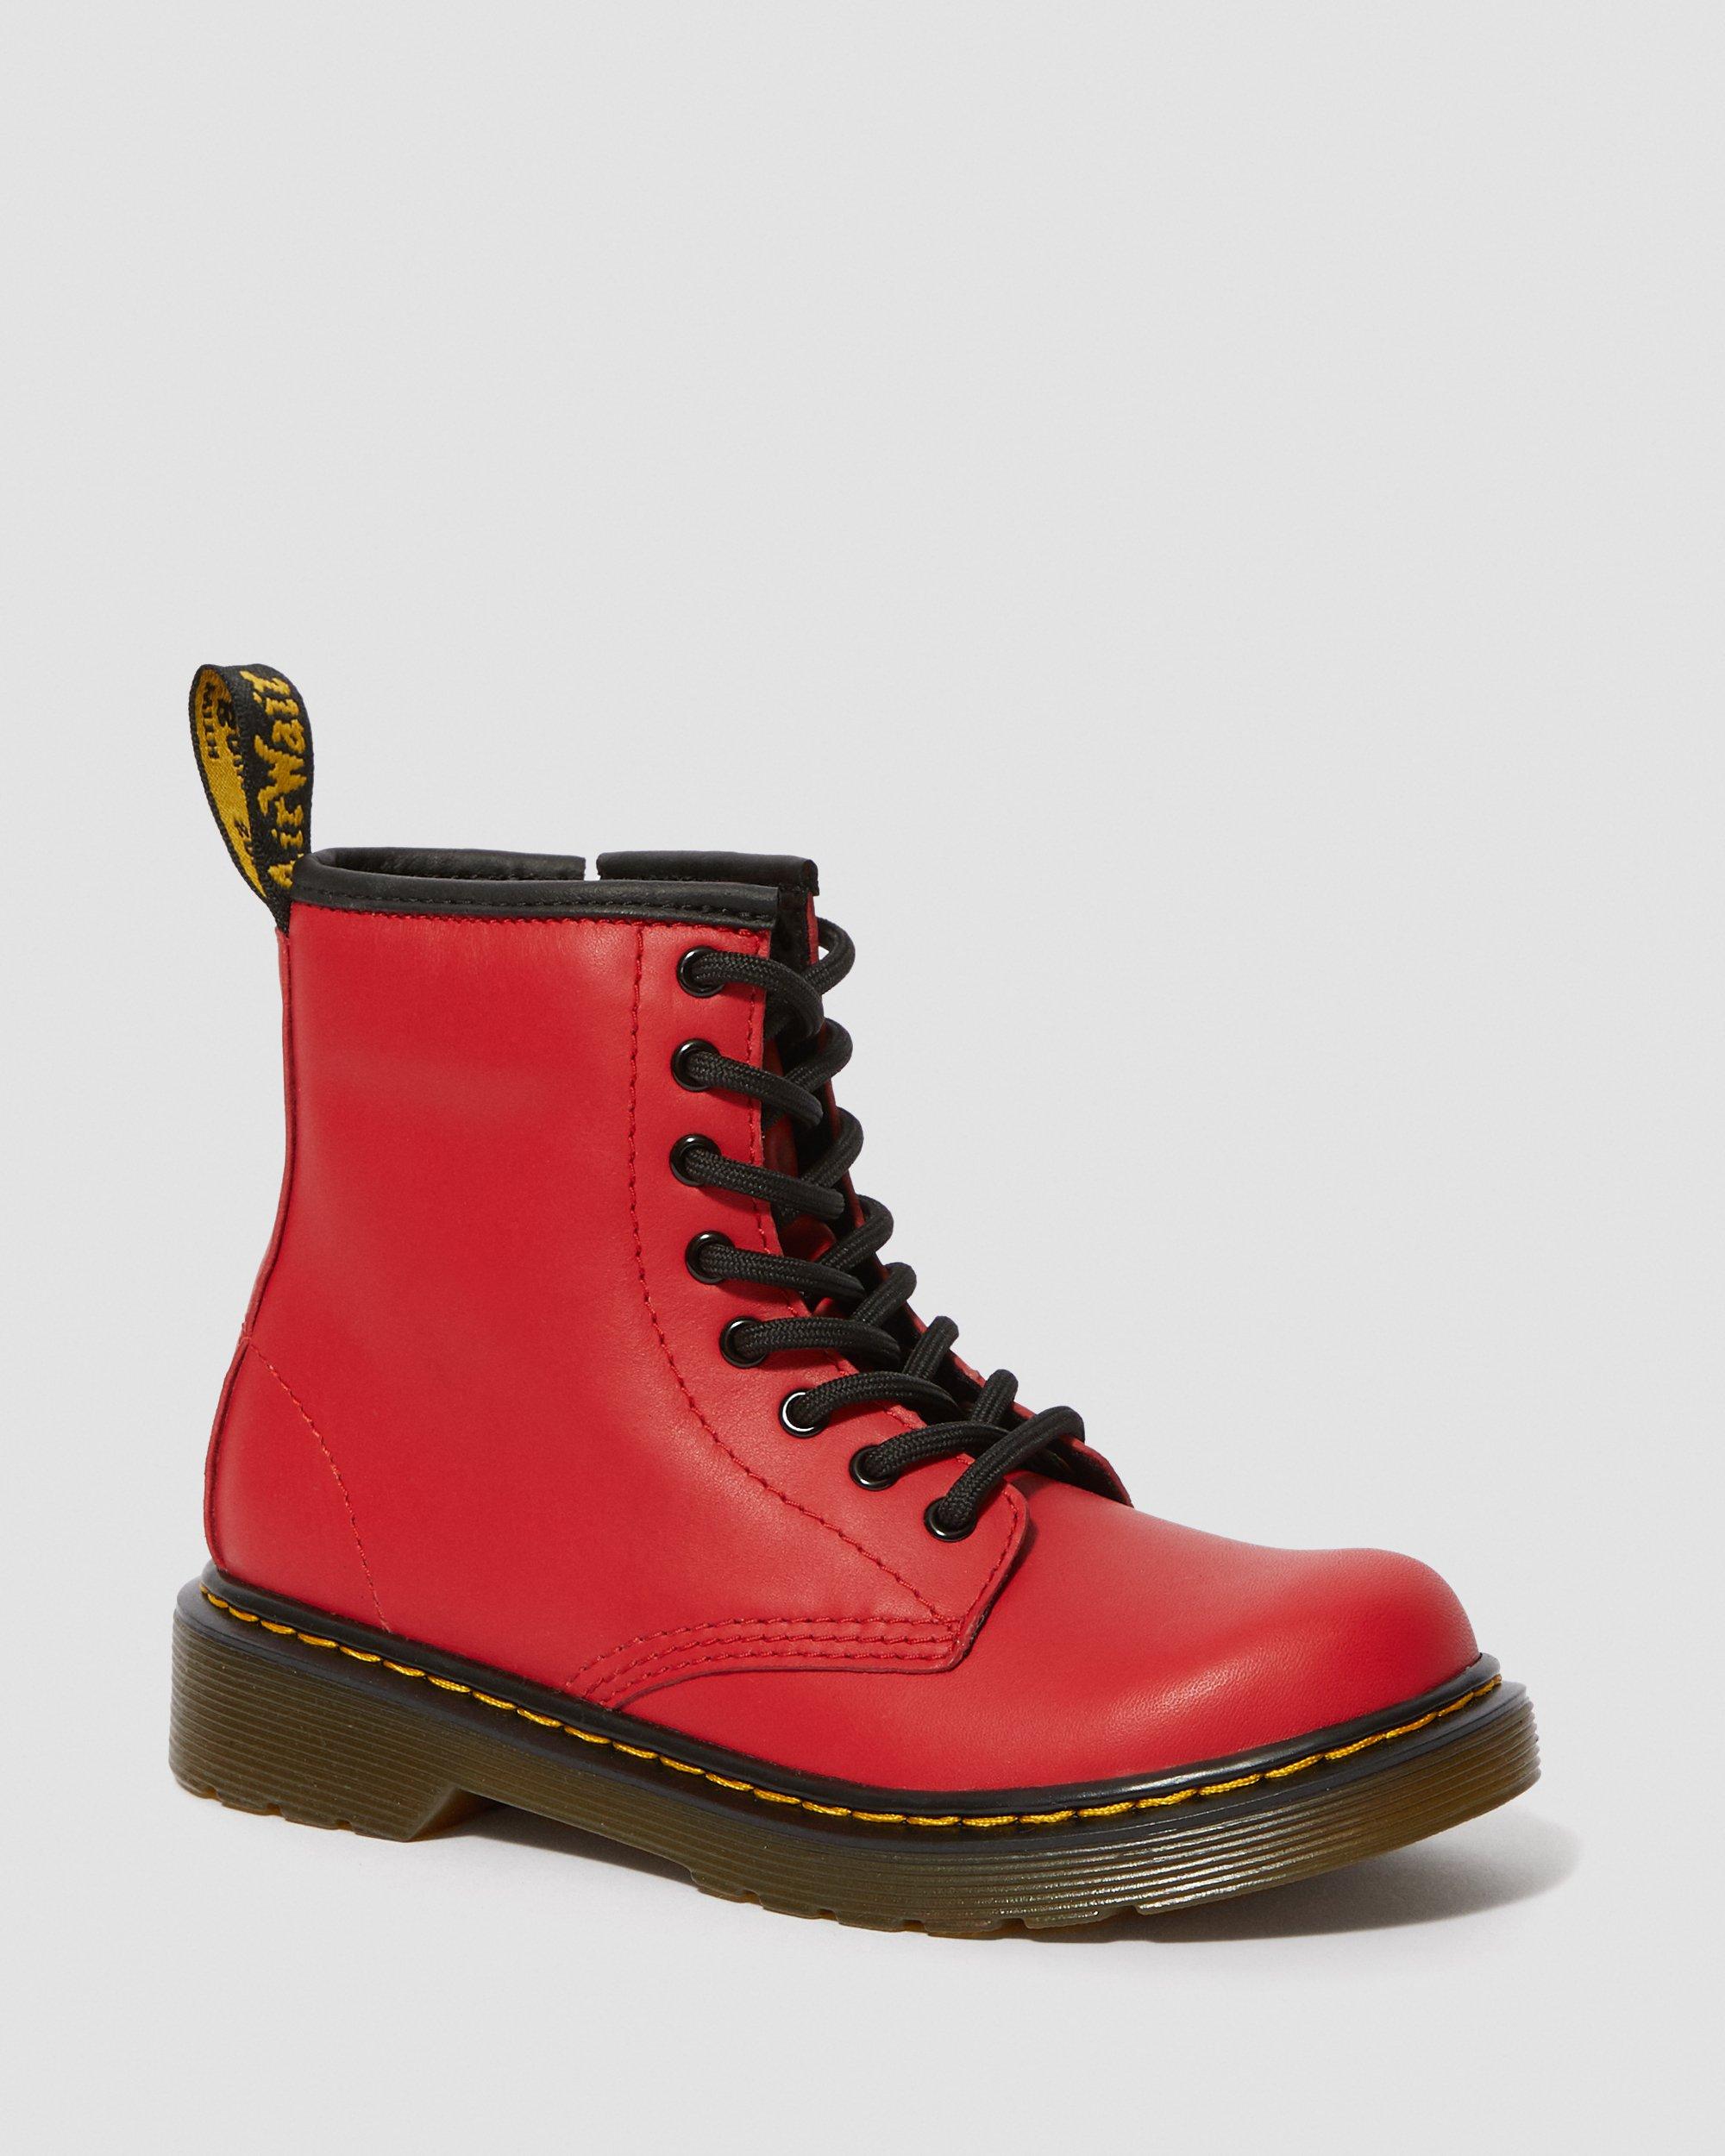 Junior 1460 Muted Leather Lace Up Boots in Red | Dr. Martens